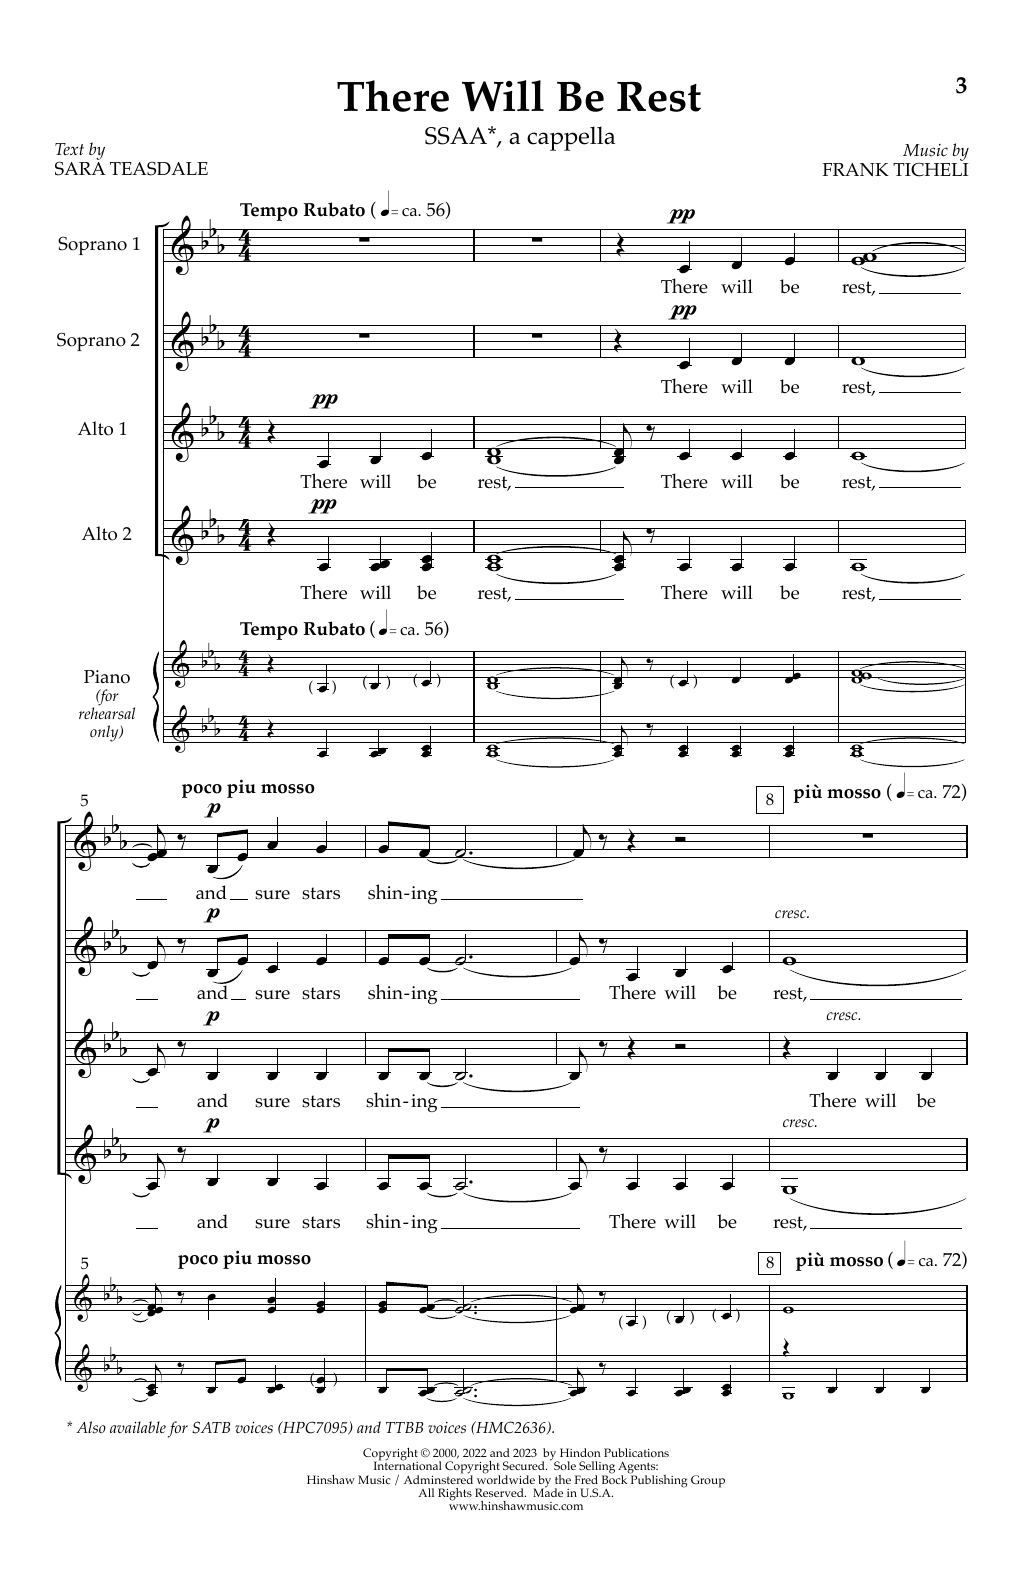 Download Frank Ticheli There Will Be Rest Sheet Music